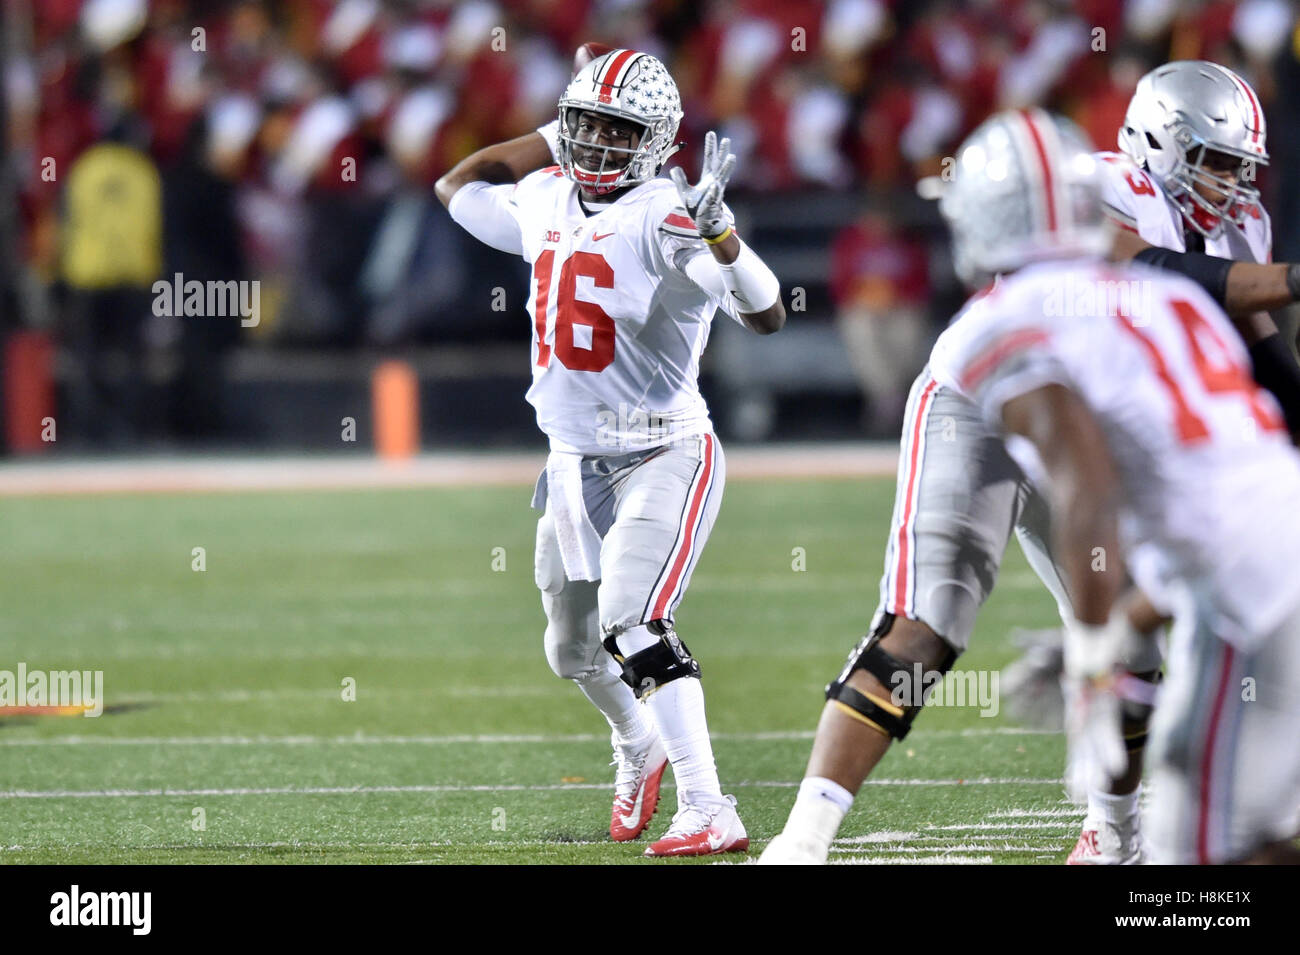 College Park, Maryland, USA. 12th Nov, 2016. Ohio State Buckeyes quarterback J.T. BARRETT (16) fires a pass from the pocket during a game played at Maryland Stadium at College Park, MD. Ohio State beat Maryland 62-3. © Ken Inness/ZUMA Wire/Alamy Live News Stock Photo